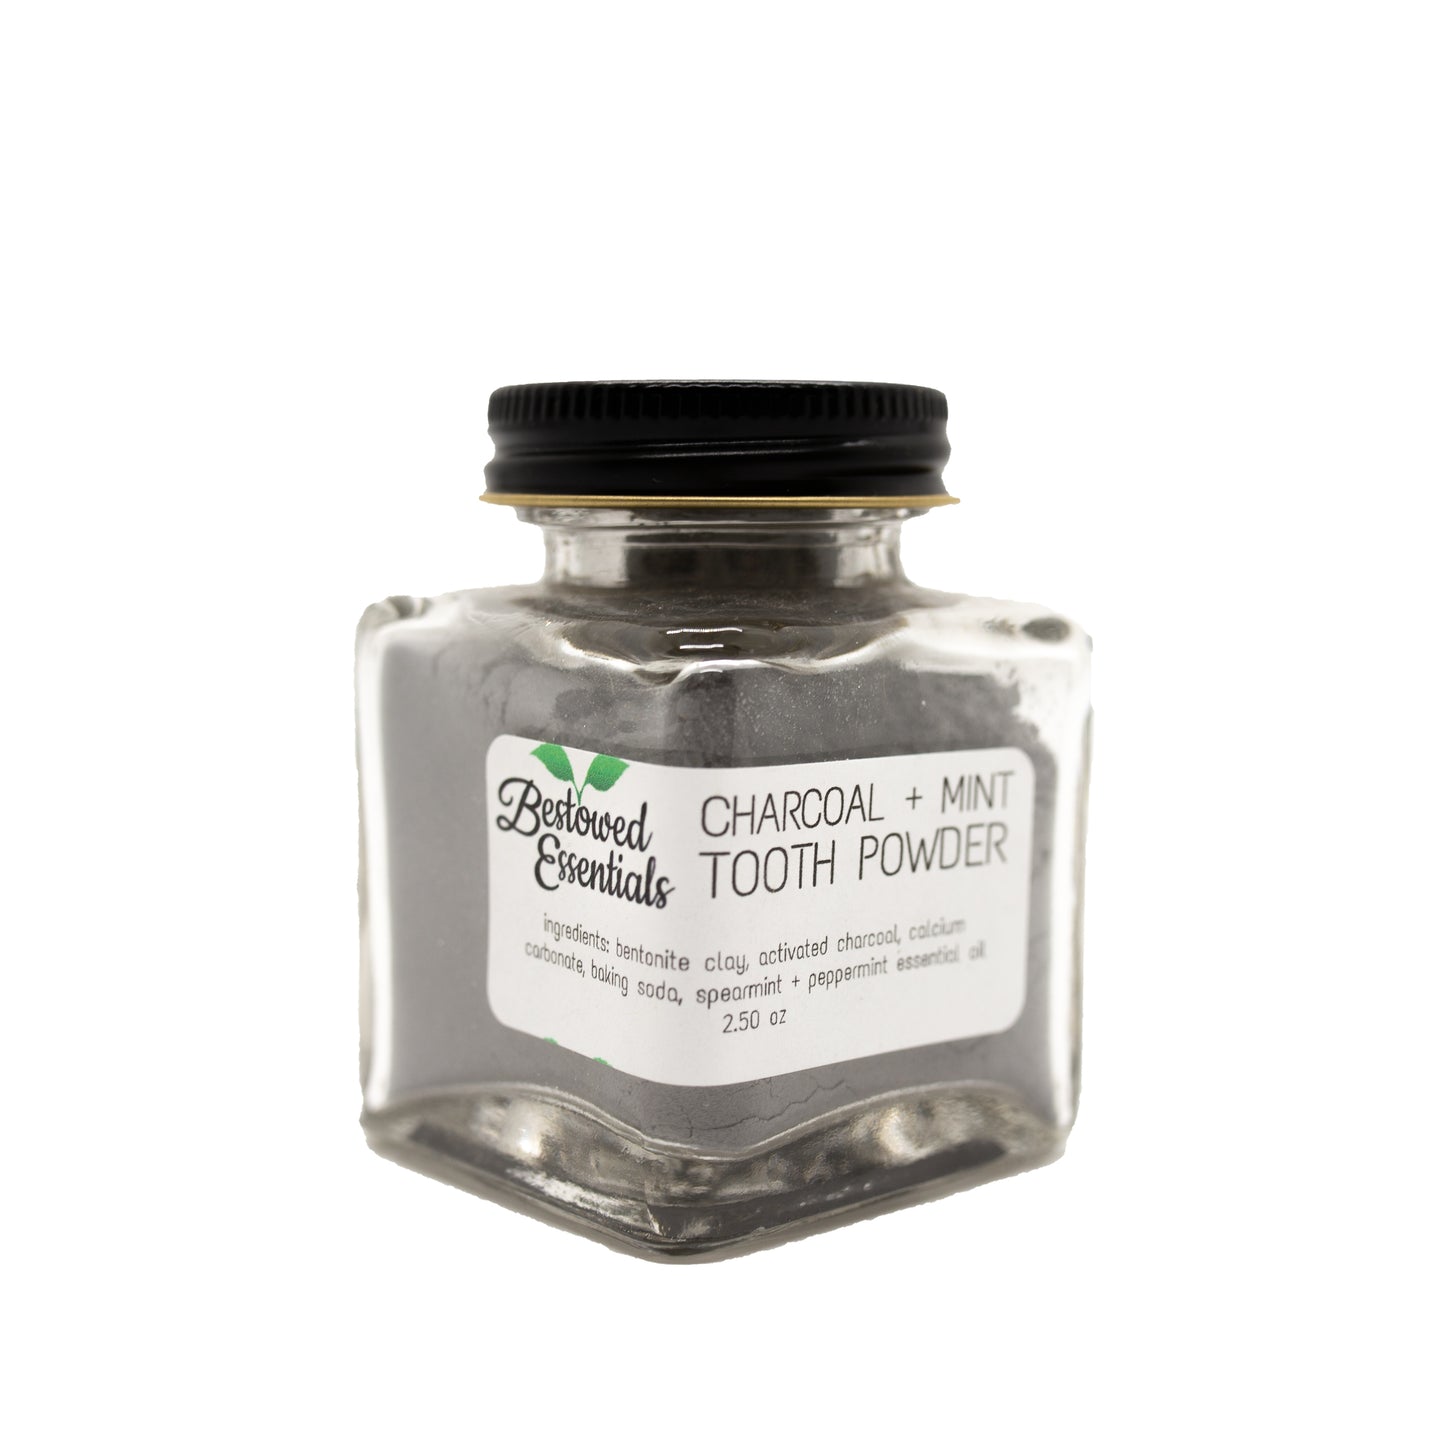 Square bottle of gray tooth powder with a black lid.